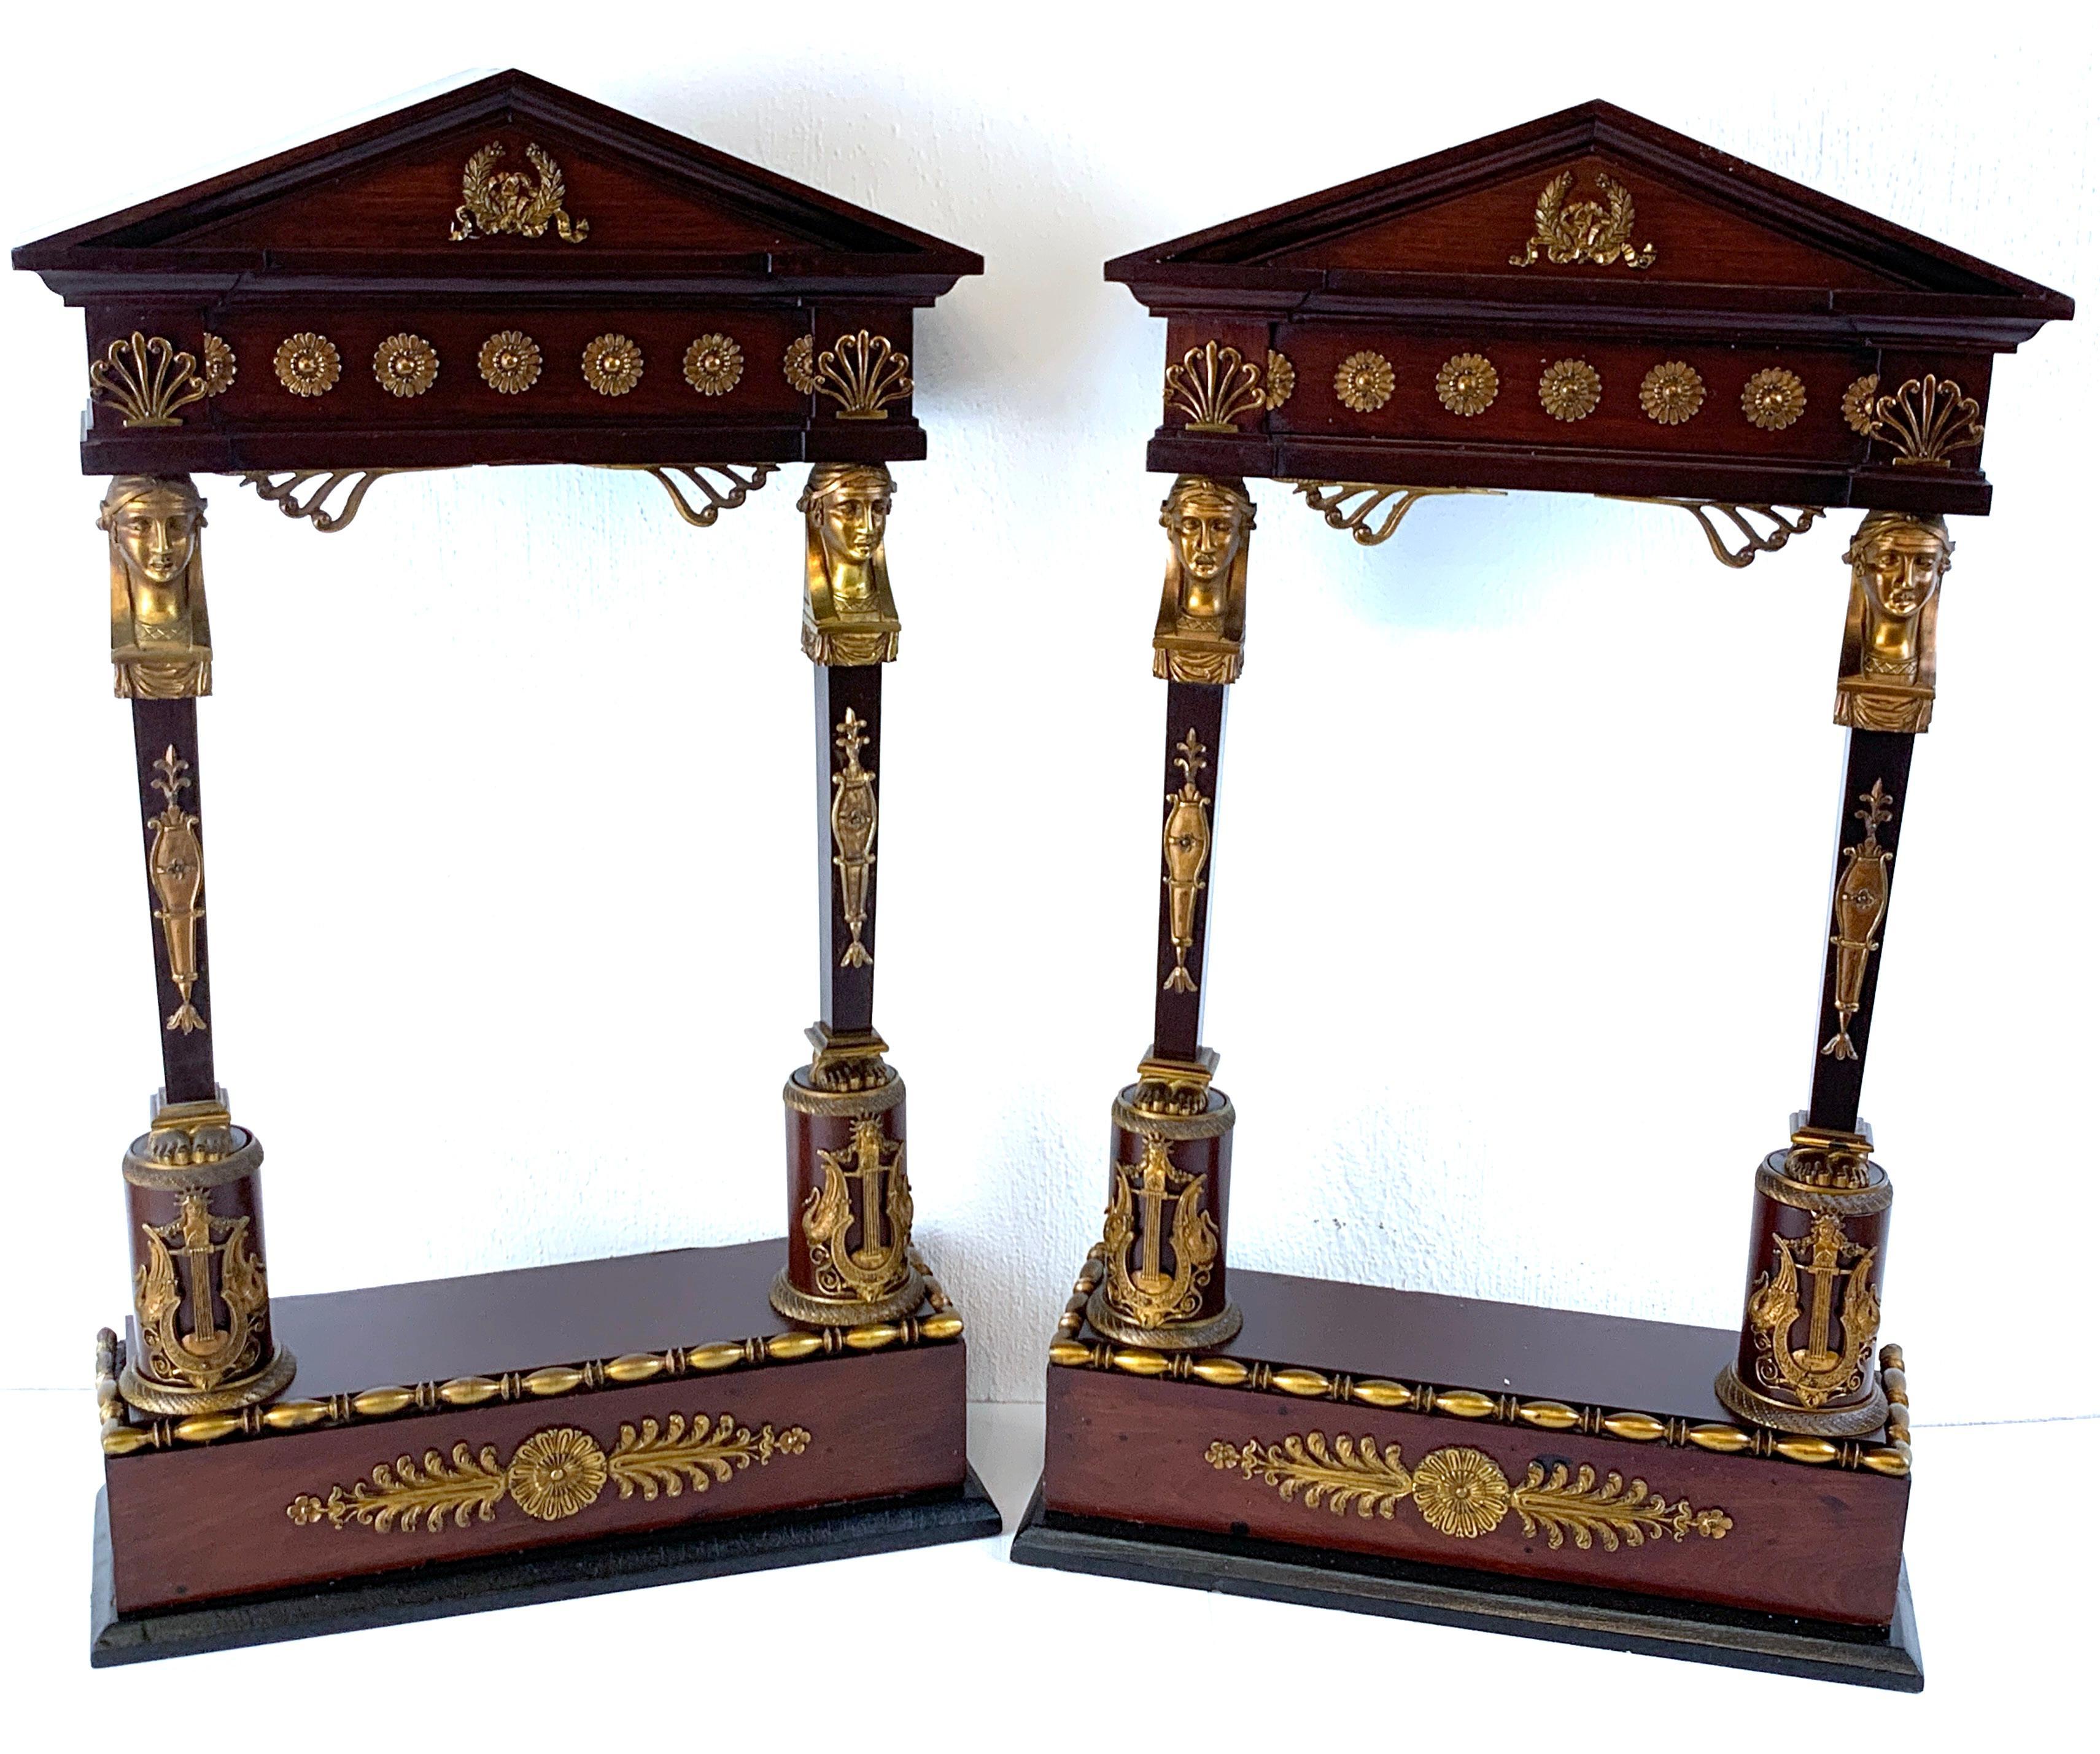 A pair of second Empire Caryatid wall ormolu mounted wall shelves, each one with arched pediment, with caryatid columns, resting on a plinth with a display surface of 6.5”wide x 3”deep x 12.25” high.
 